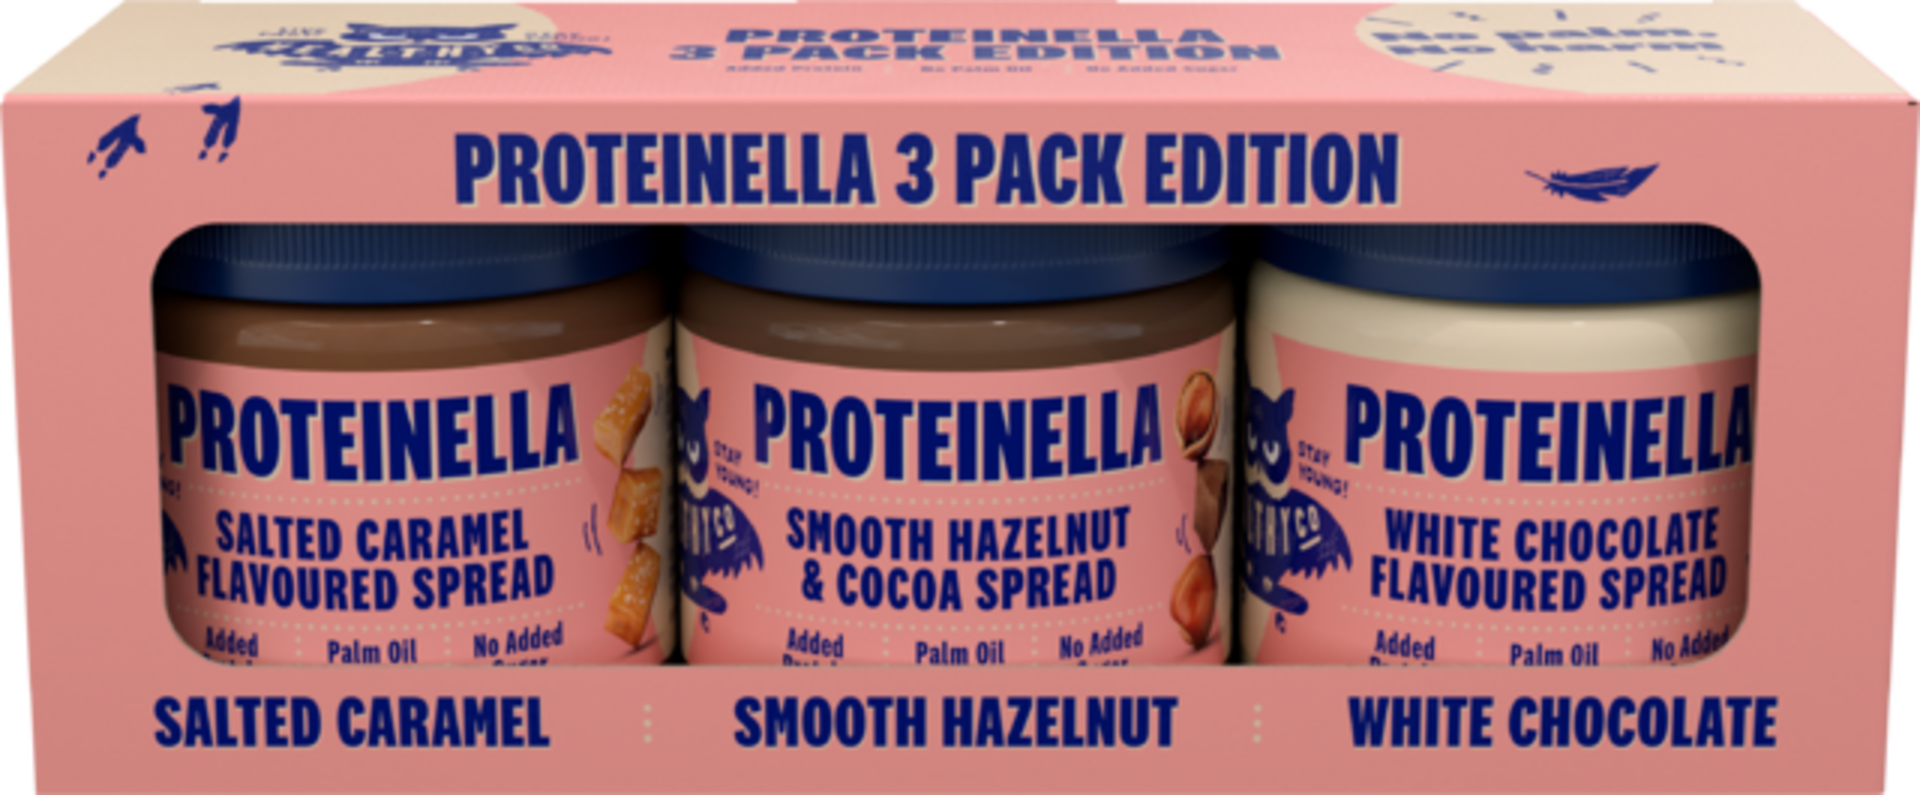 Healthyco Proteinella 3 pack edition 3x200 g